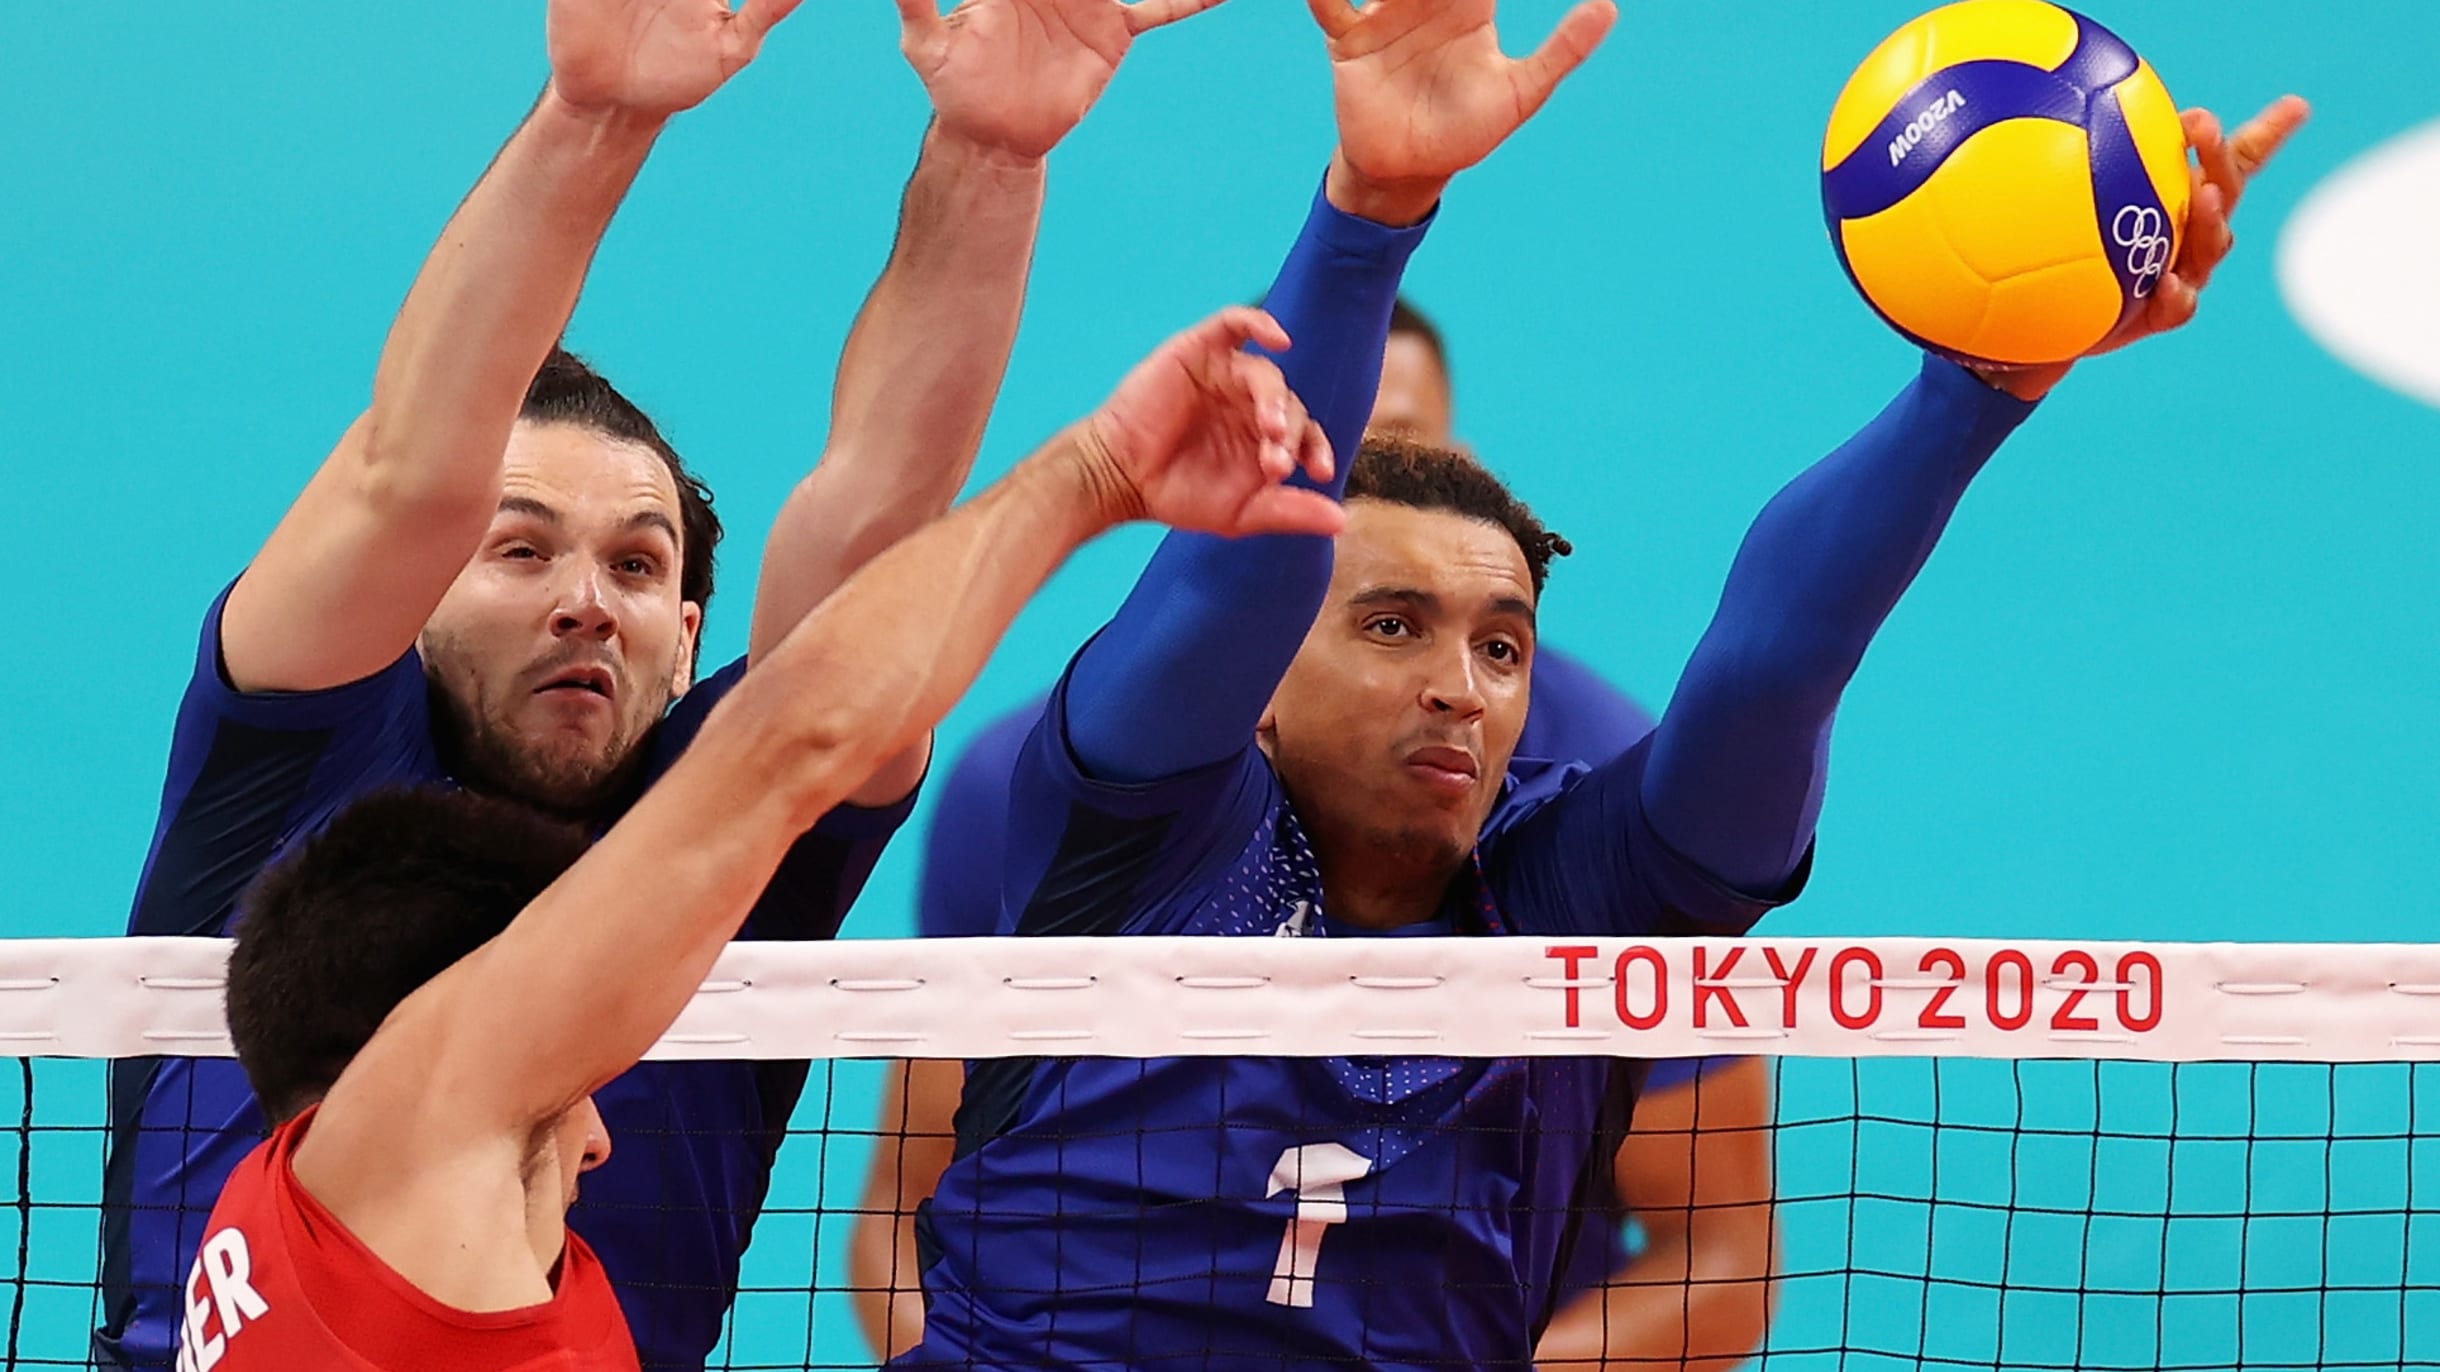 Mens Road to Paris Volleyball Qualifier Groups, venues, schedule and key dates to watch live action